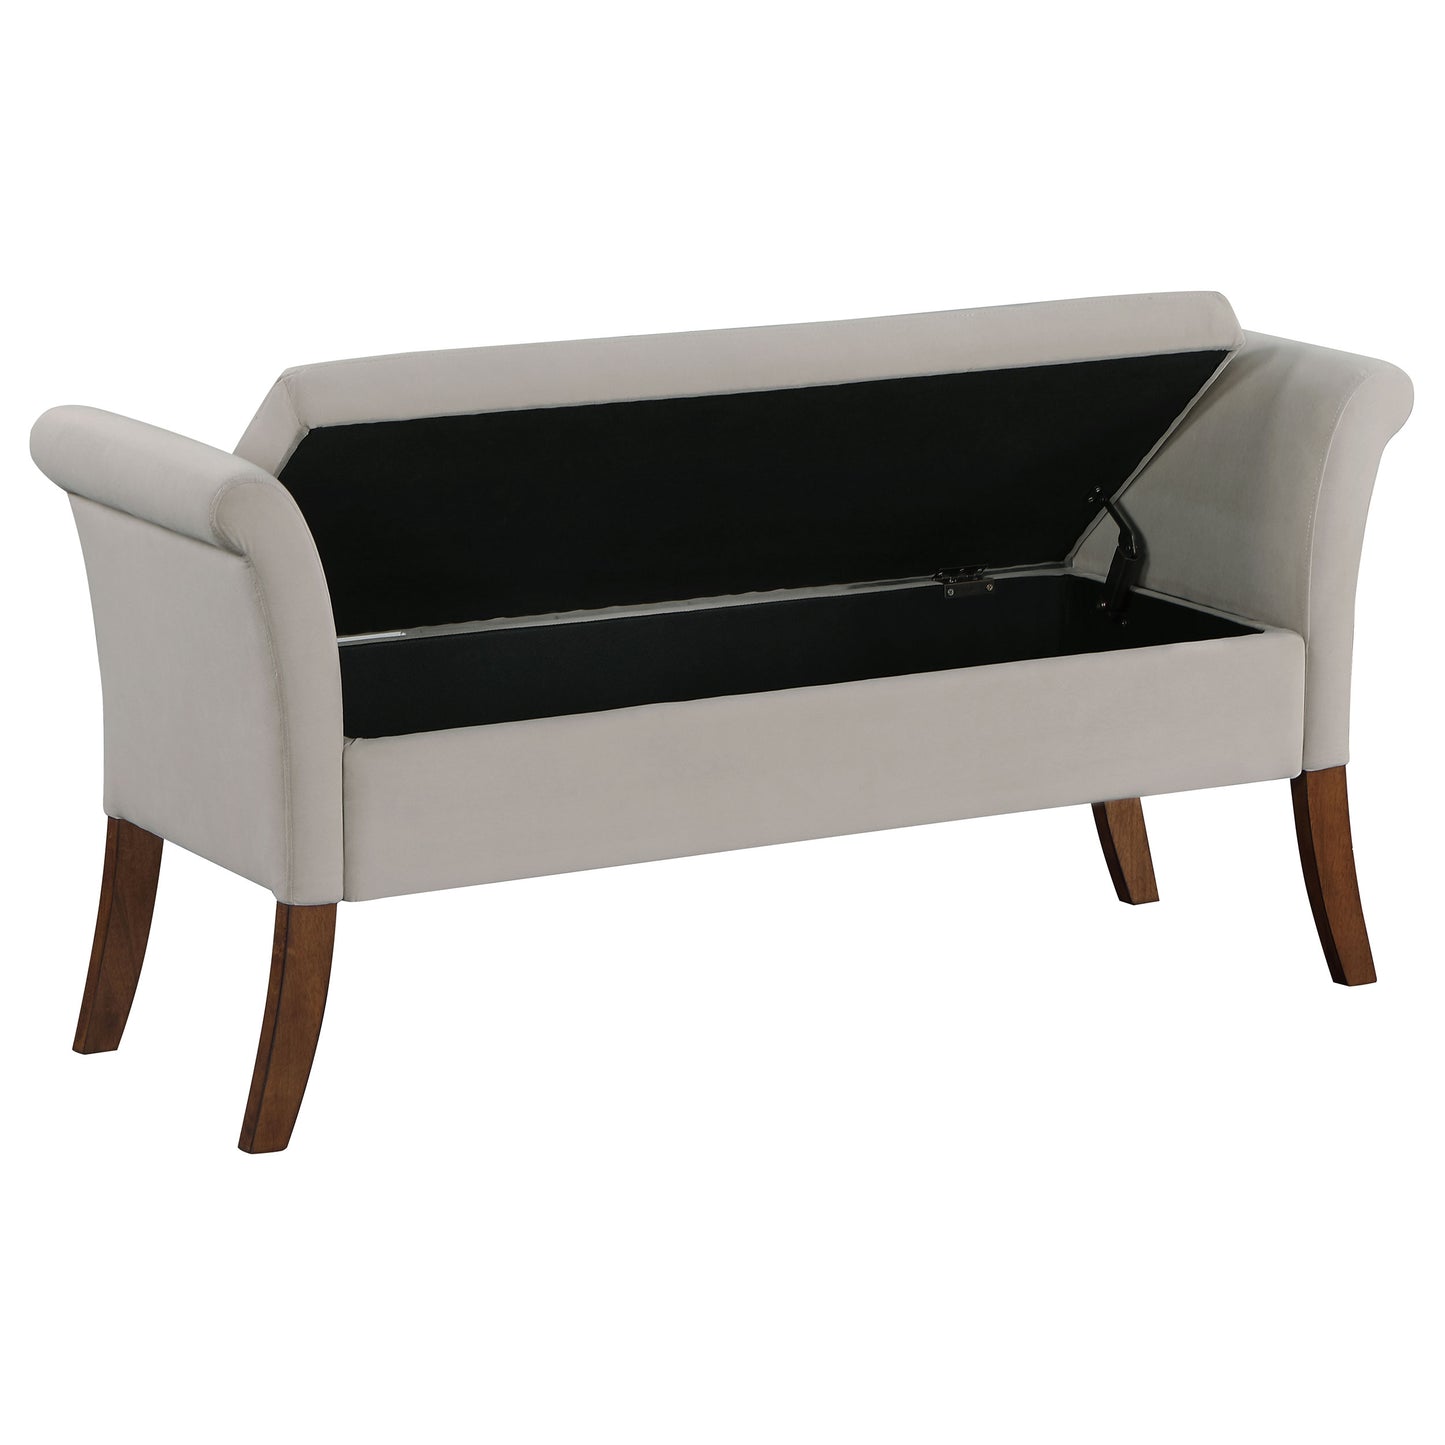 Farrah Upholstered Rolled Arms Storage Bench Beige and Brown